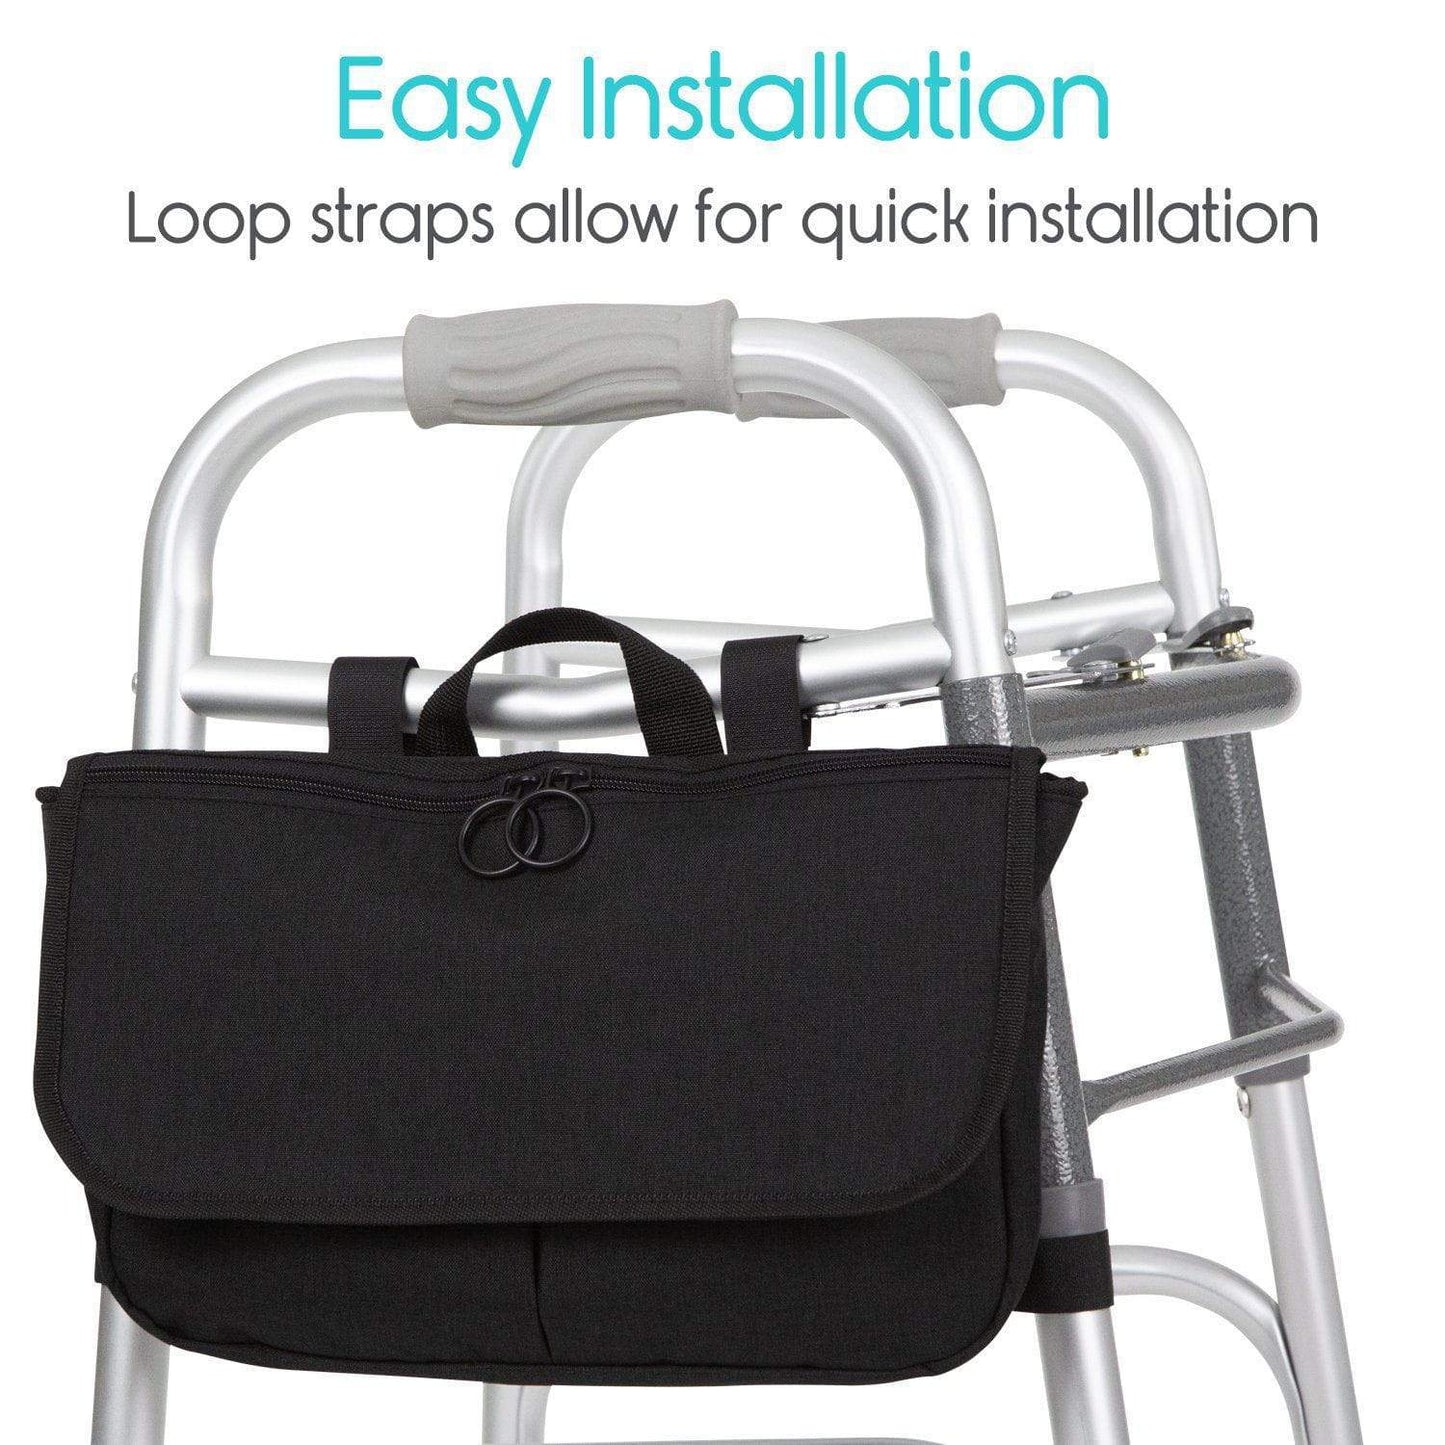 mobility side bag installed using loop strap from AskSAMIE